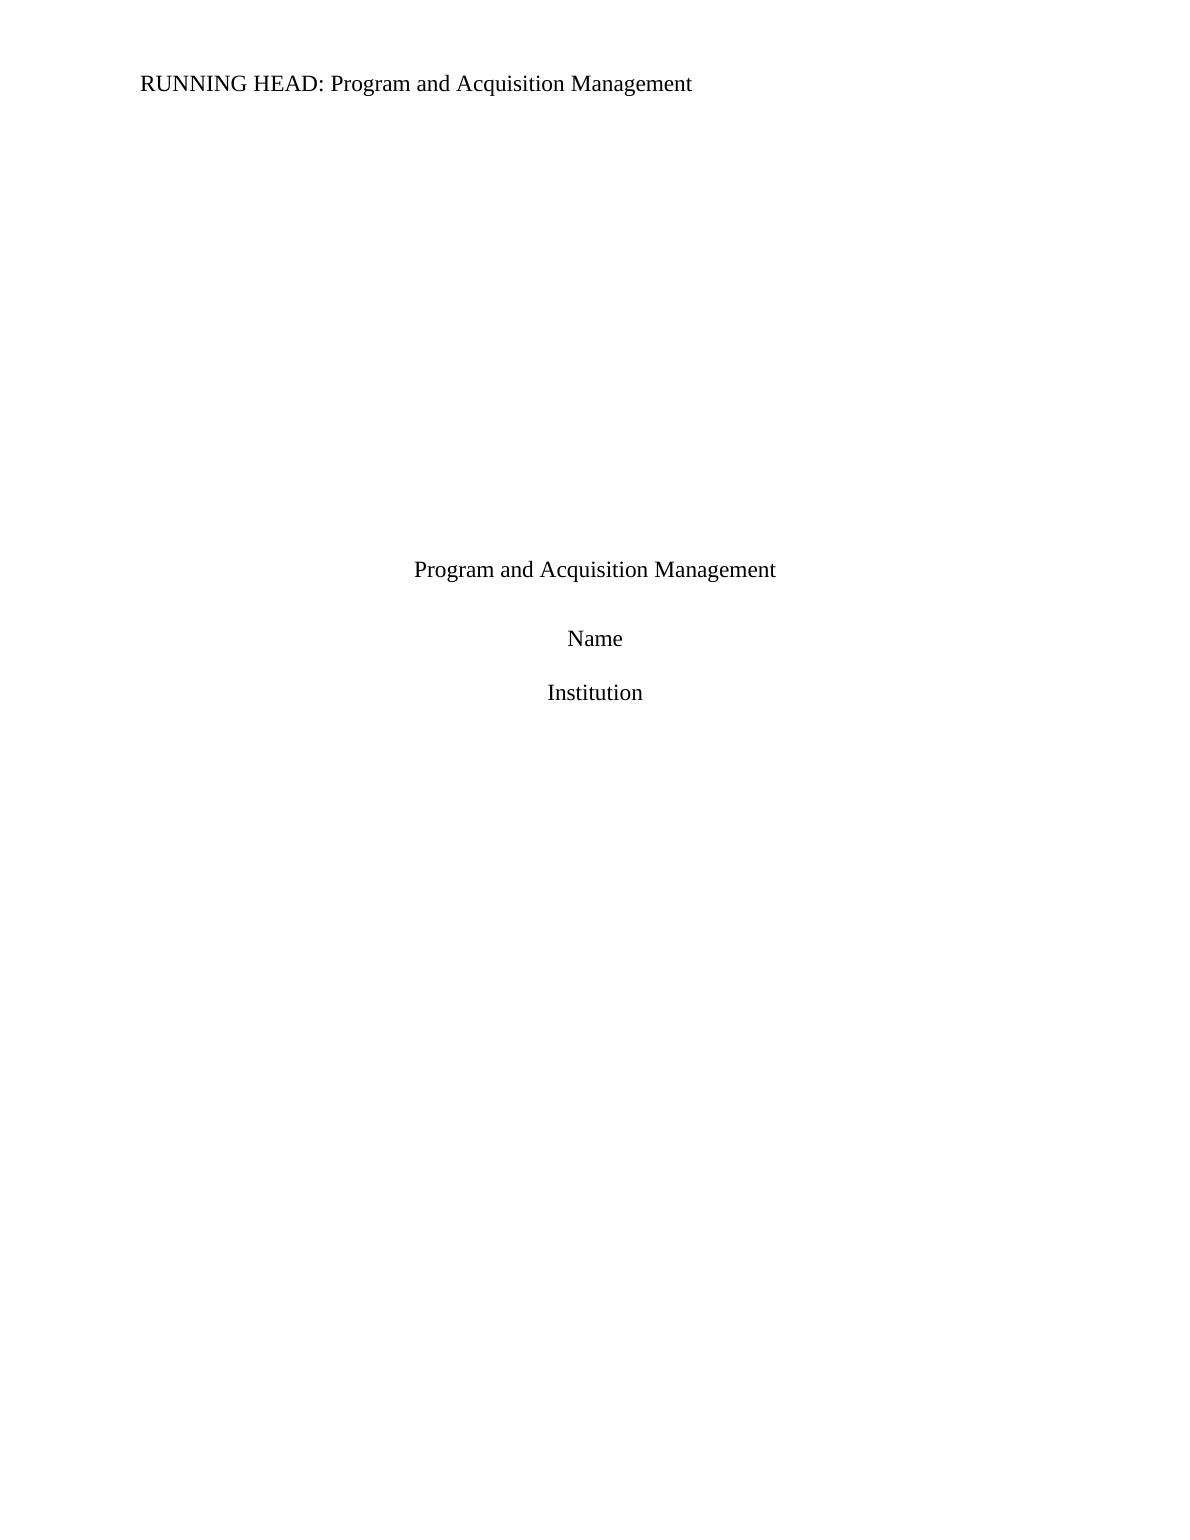 Study on Program and Acquisition Management_1